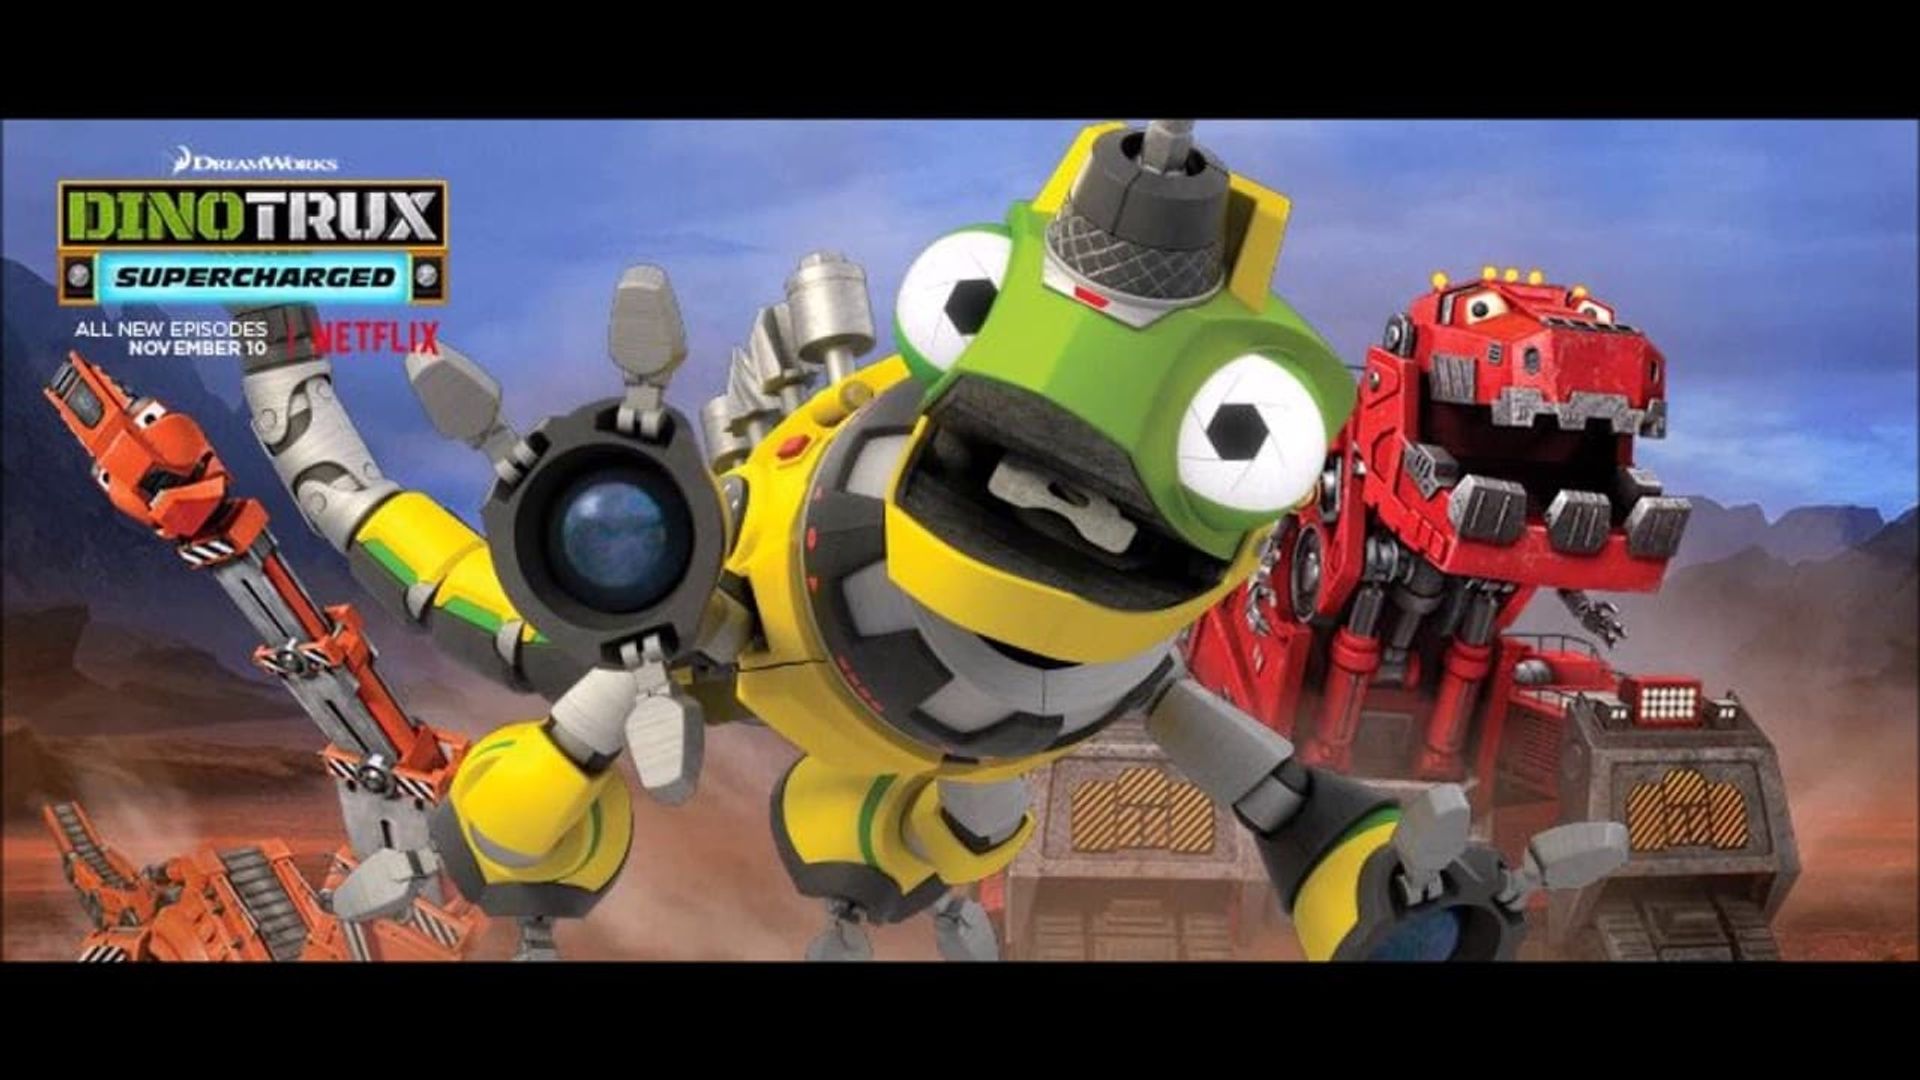 Dinotrux Supercharged background